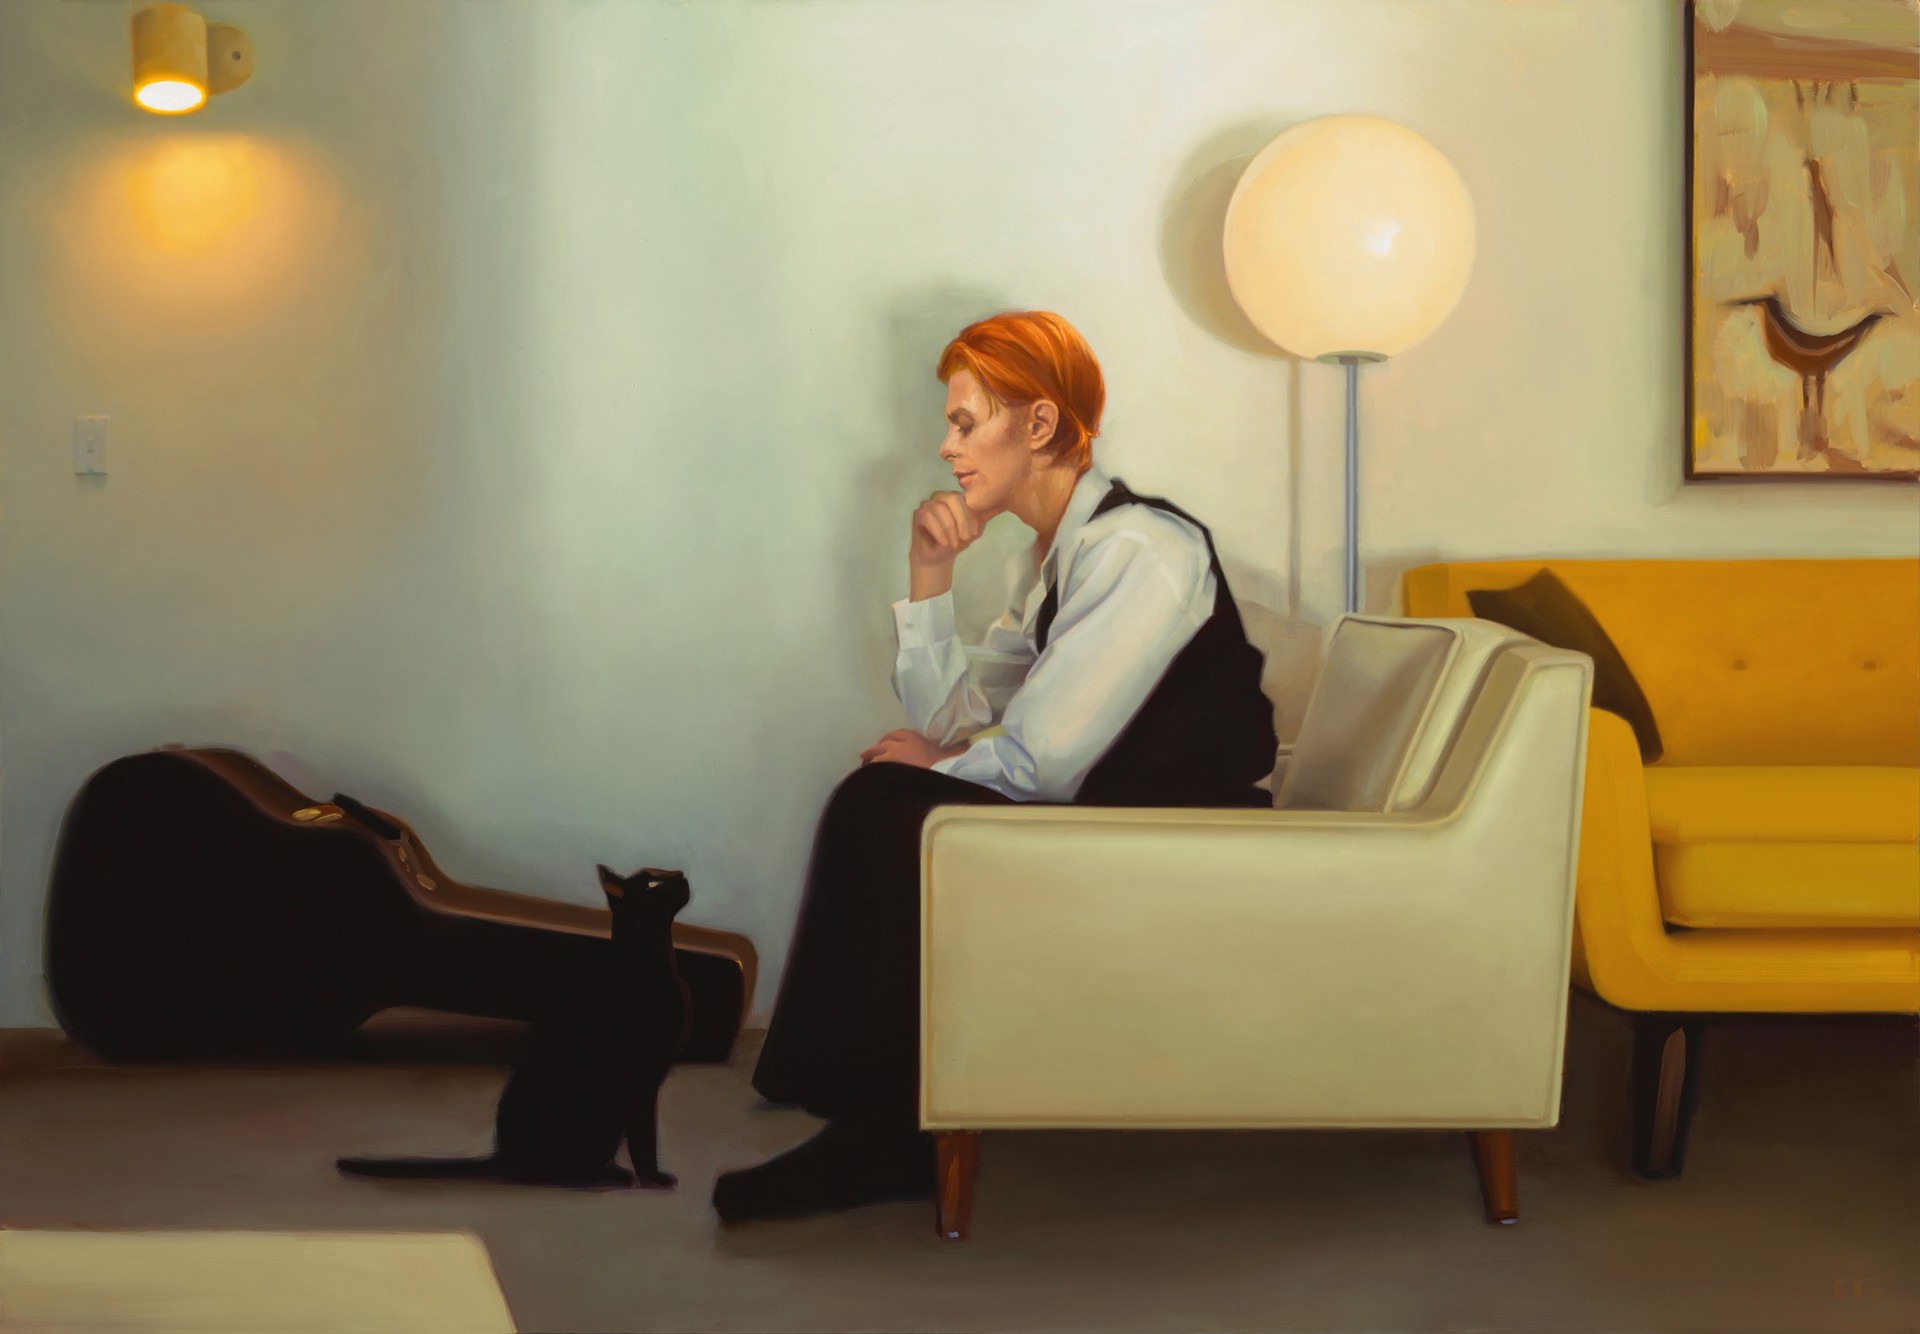 Two Visitors by Carrie Graber